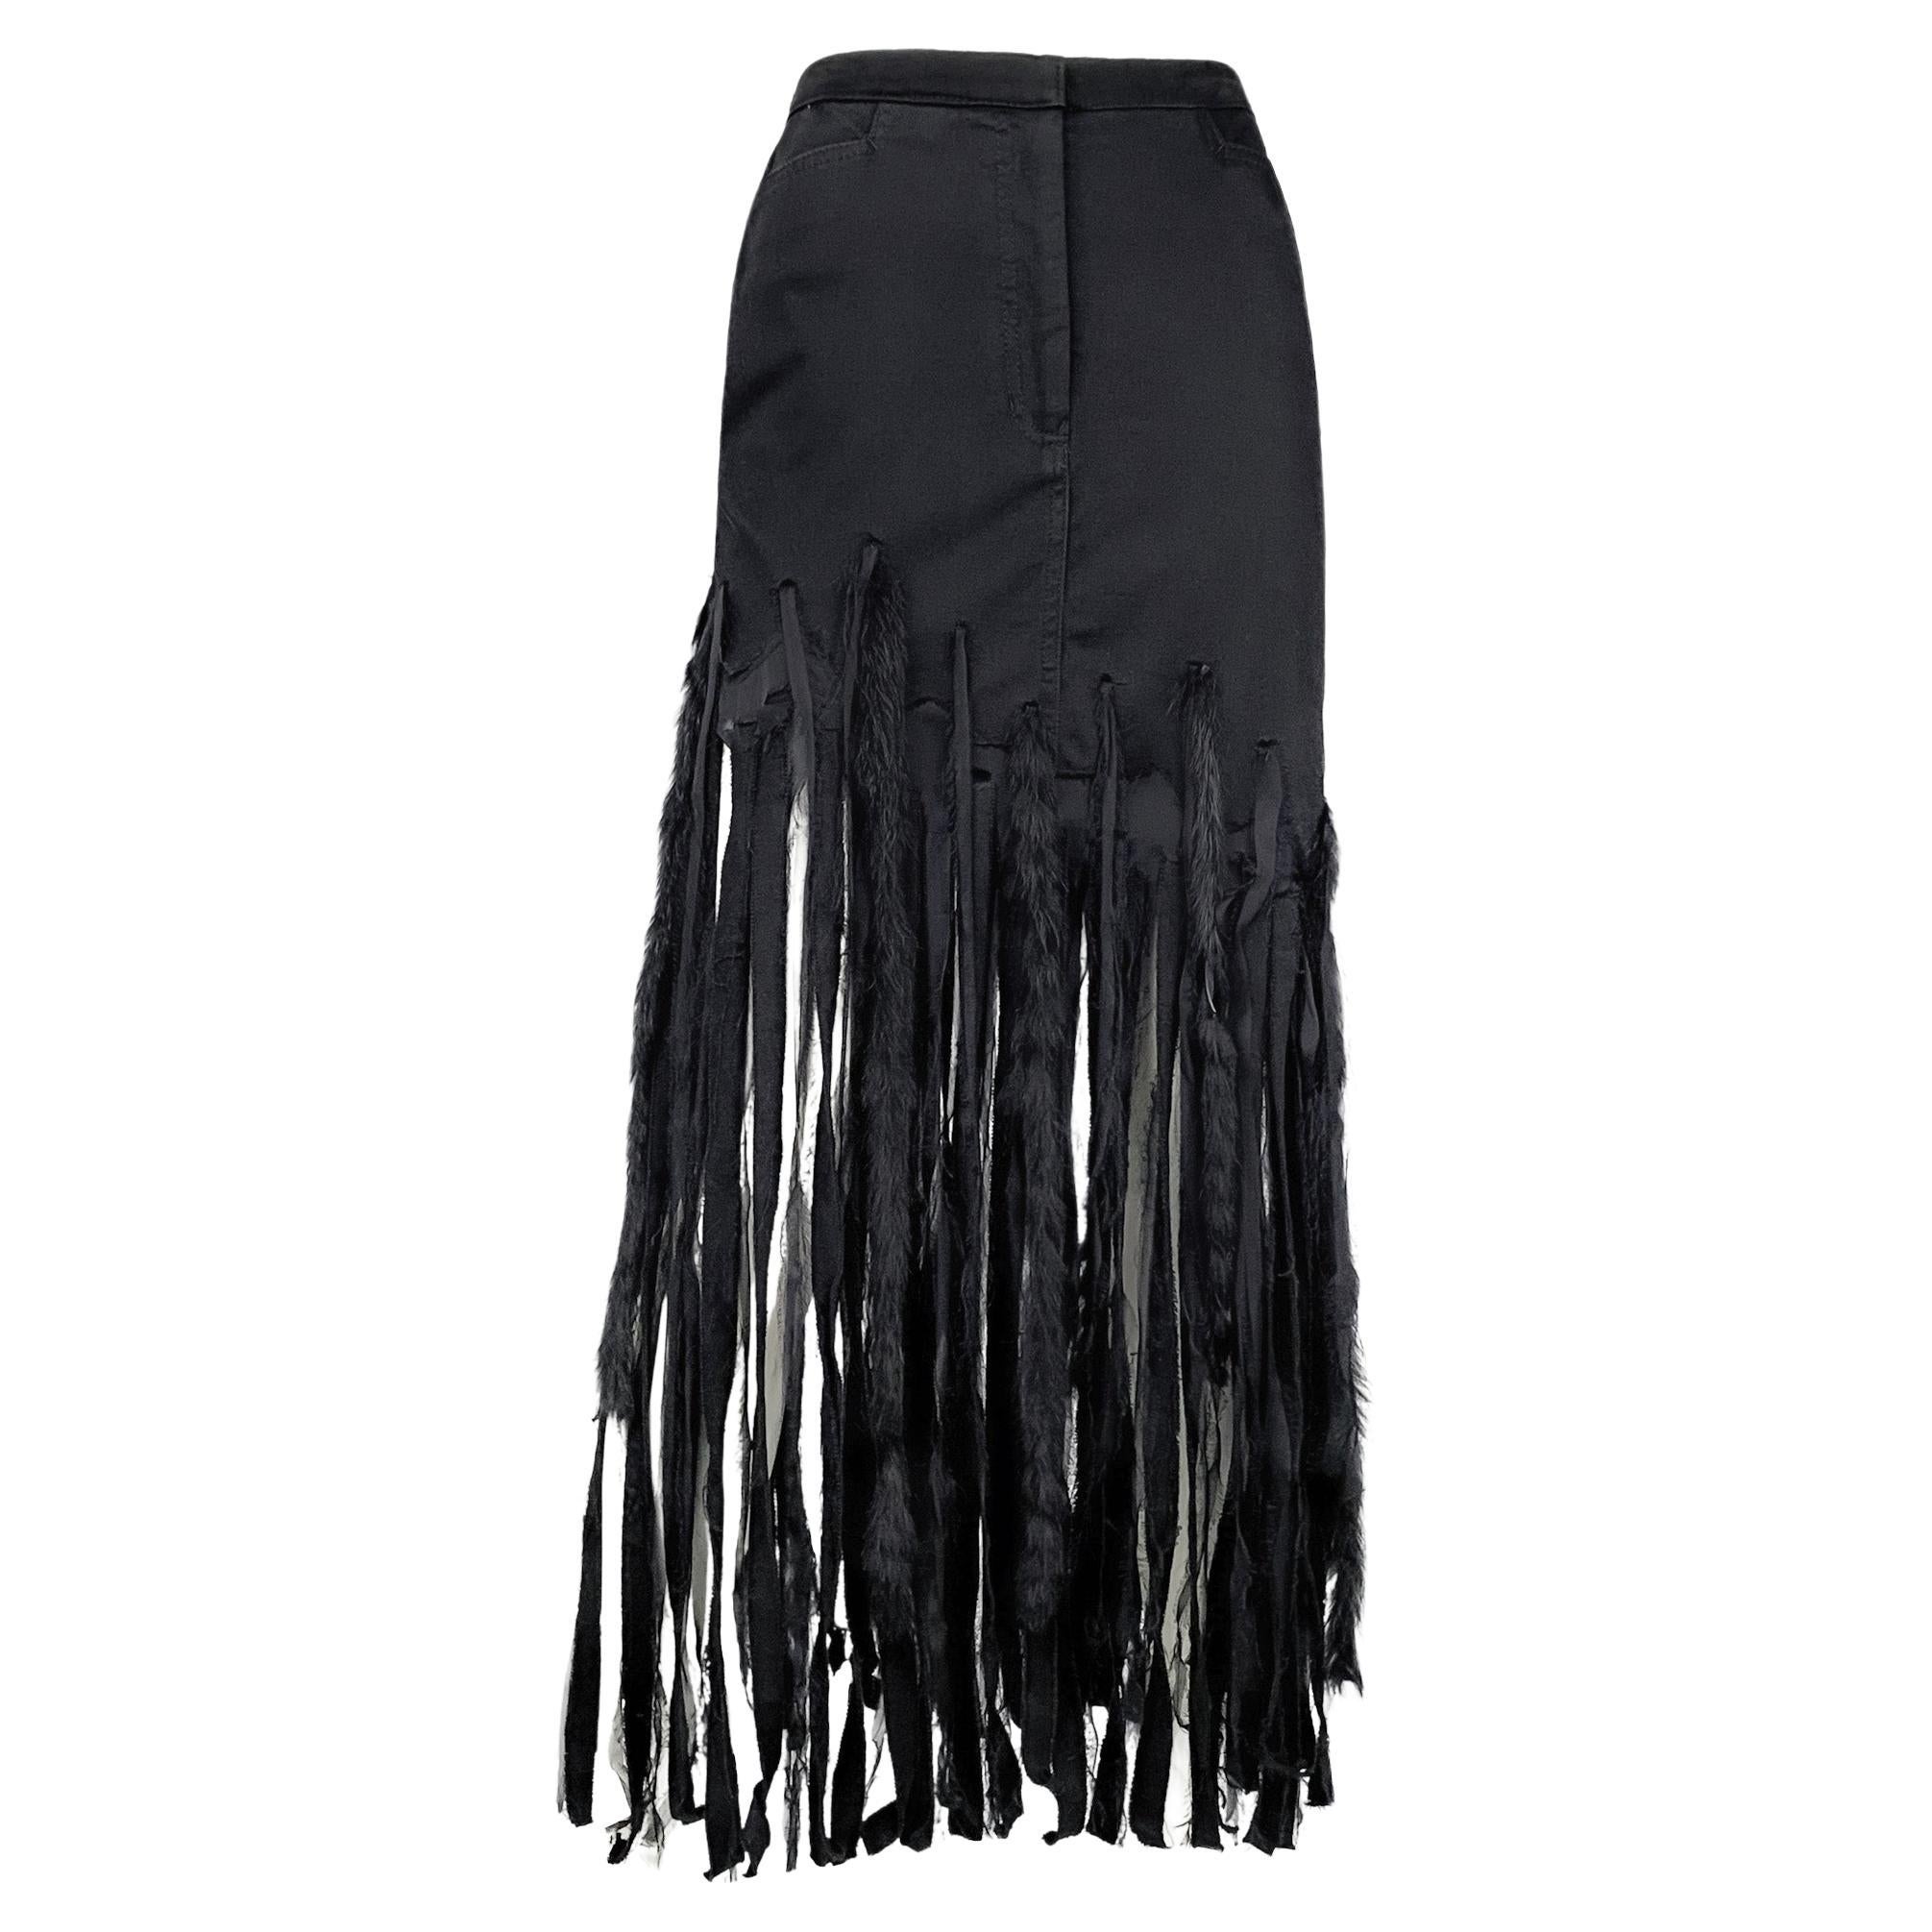 Ungaro 1990s vintage extravagant fringed maxi skirt with details in faux fur